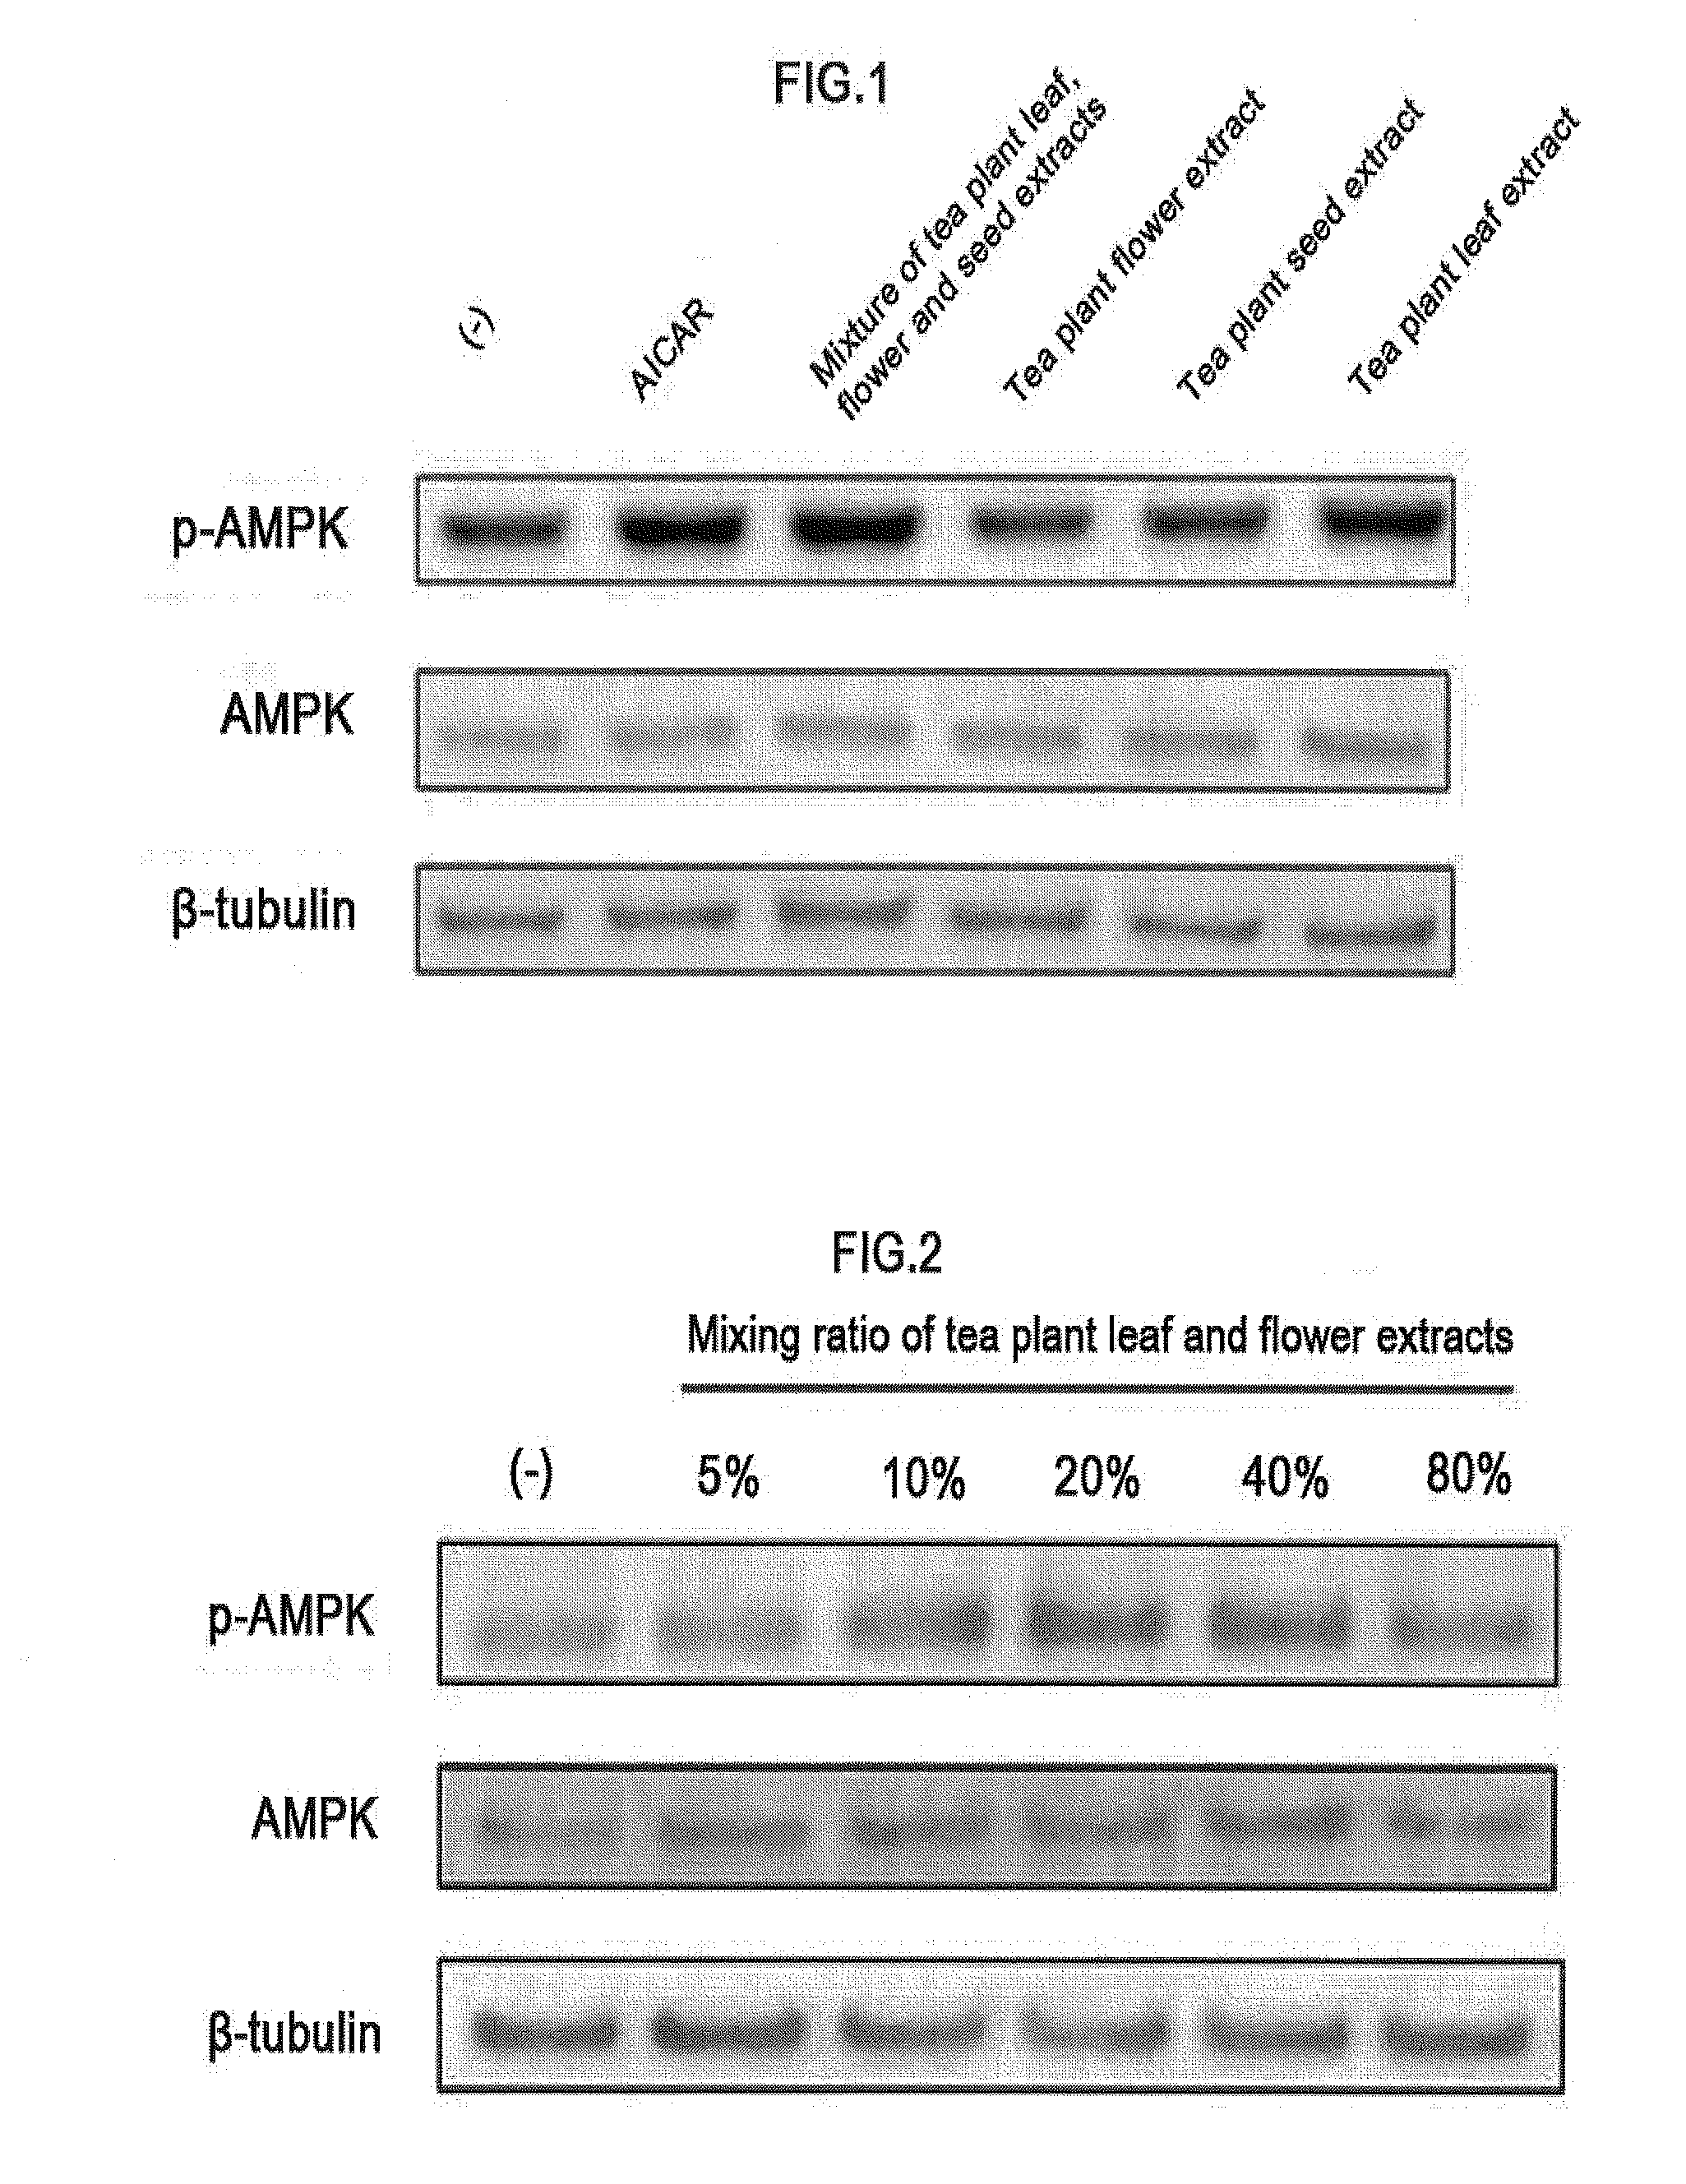 Composition for preventing or improving metabolic syndrome comprising tea plant leaf, flower and seed extract